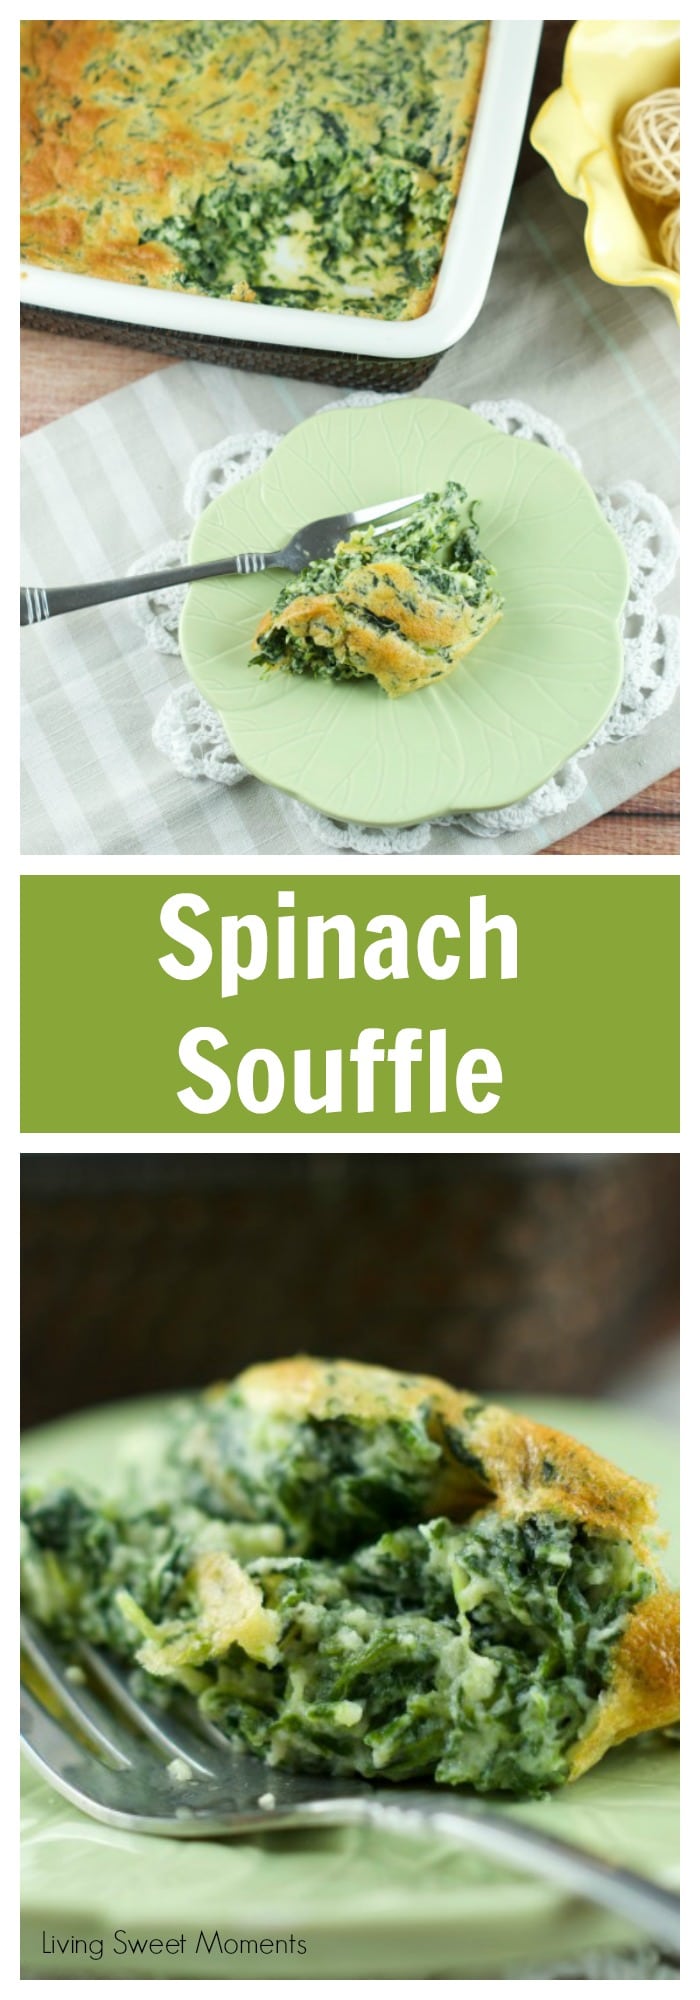 Easy Spinach Souffle Recipe - Living Sweet Moments